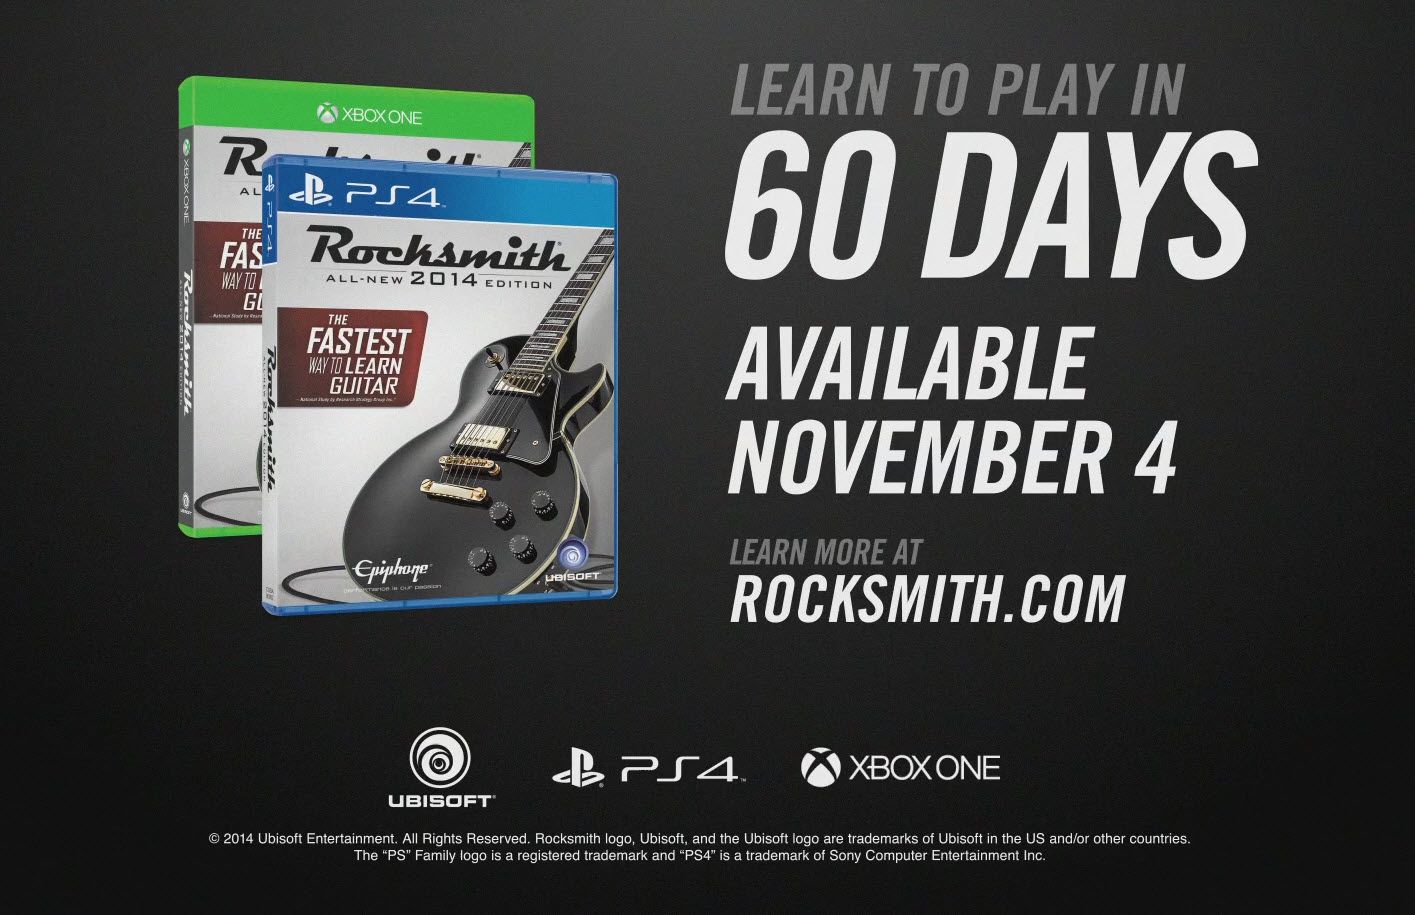 Rocksmith 2014 Edition – Remastered on PS4 — price history